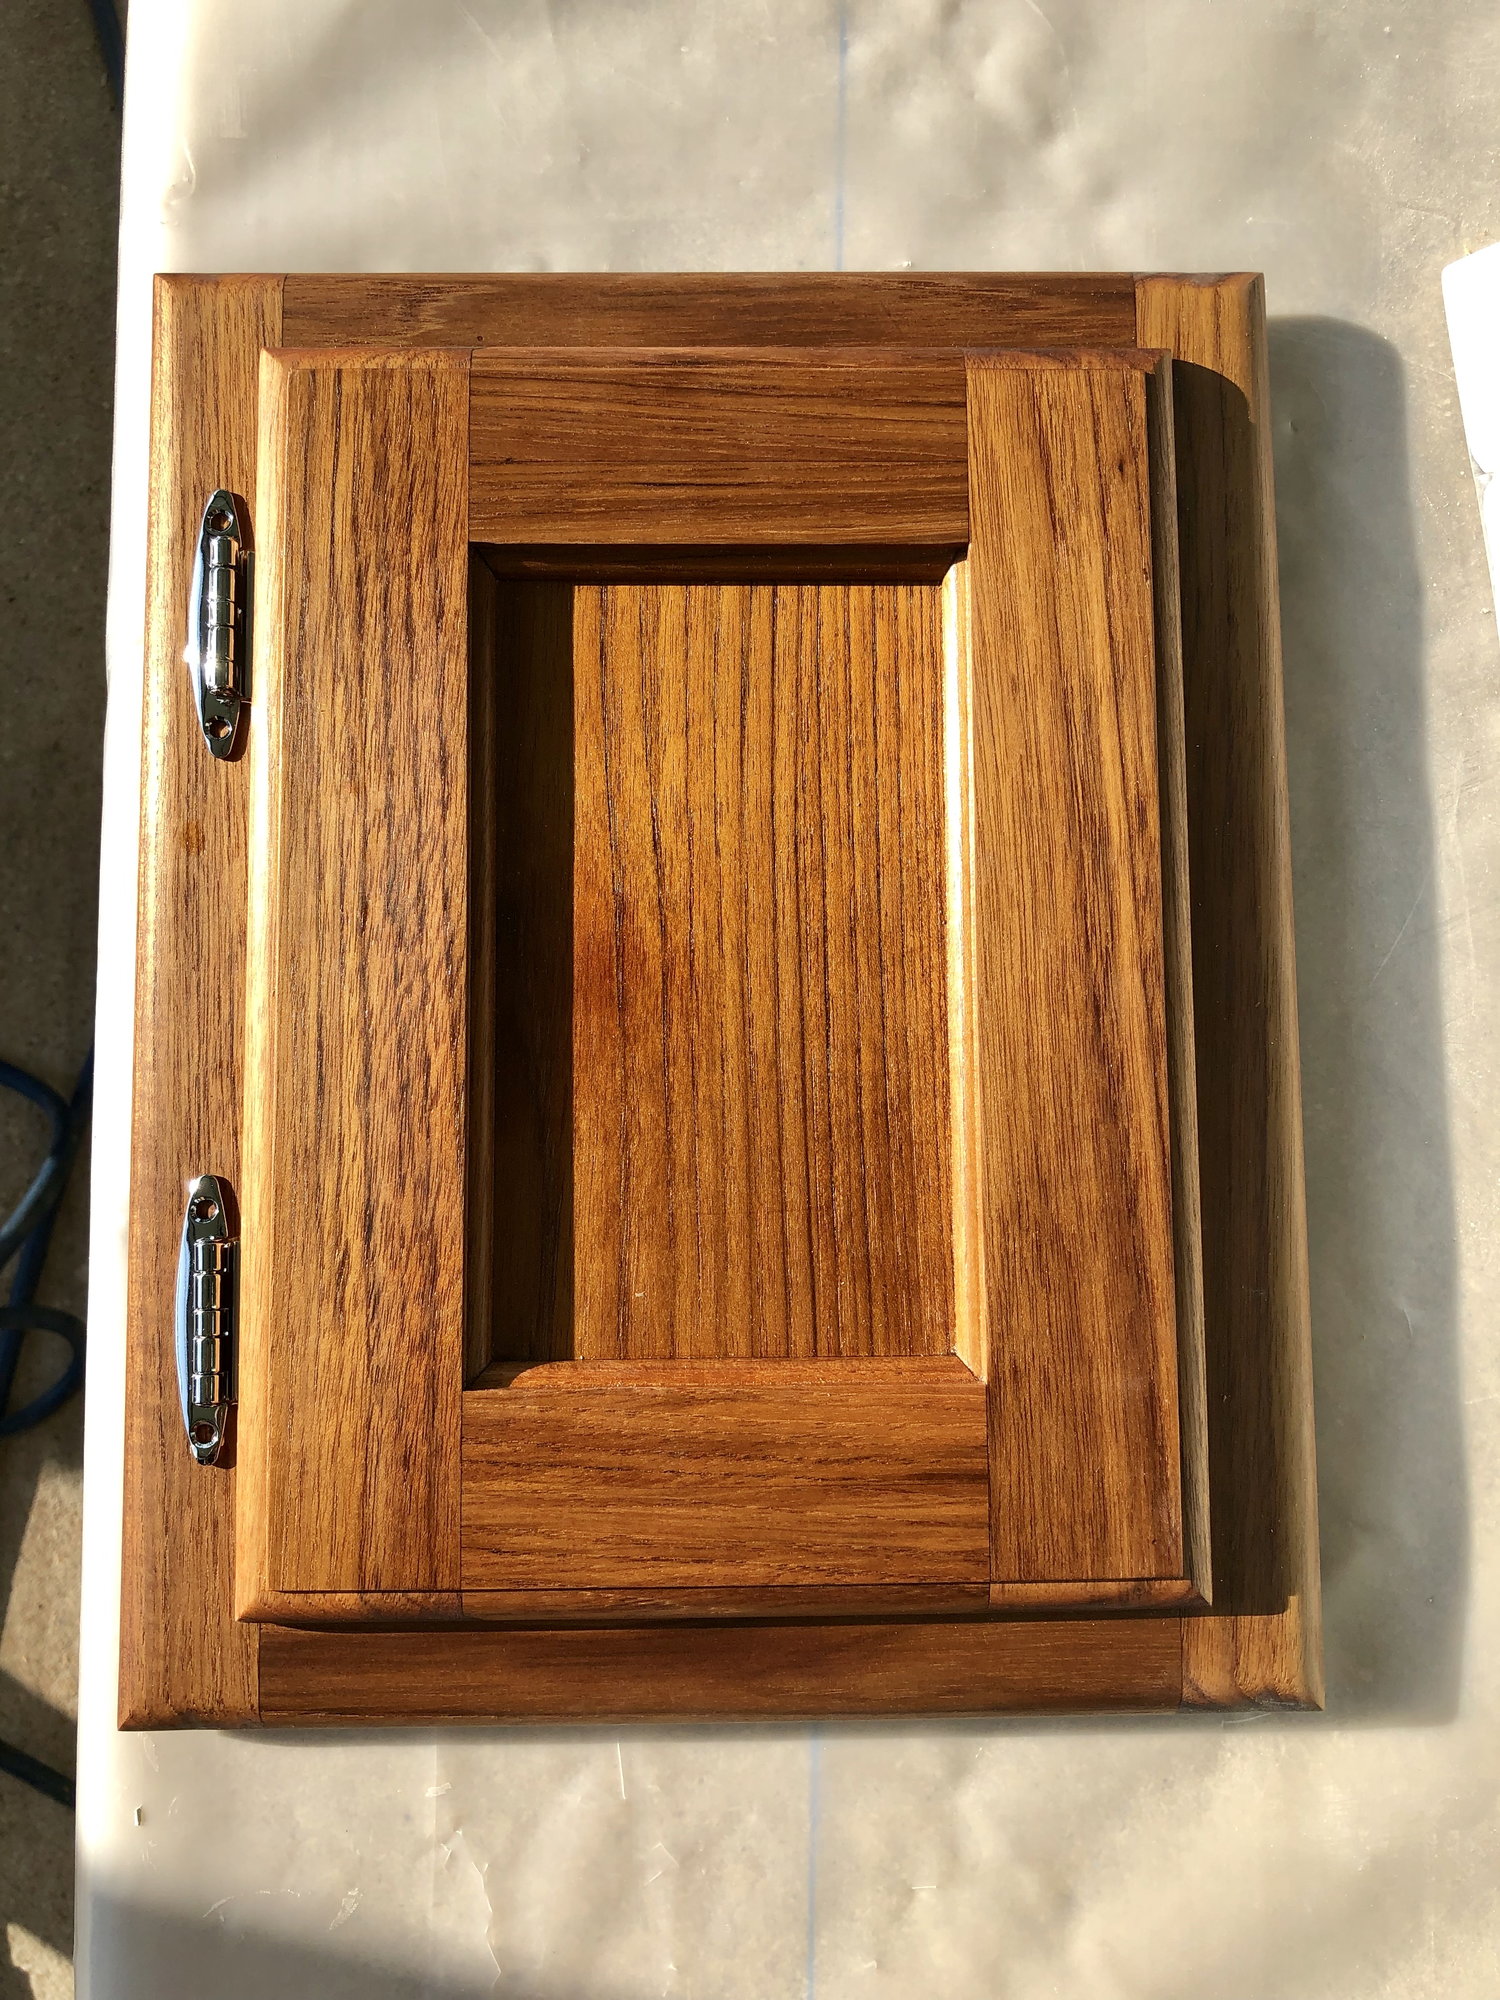 Applying wood veneer/wrap to existing interior cabinets - The Hull Truth -  Boating and Fishing Forum